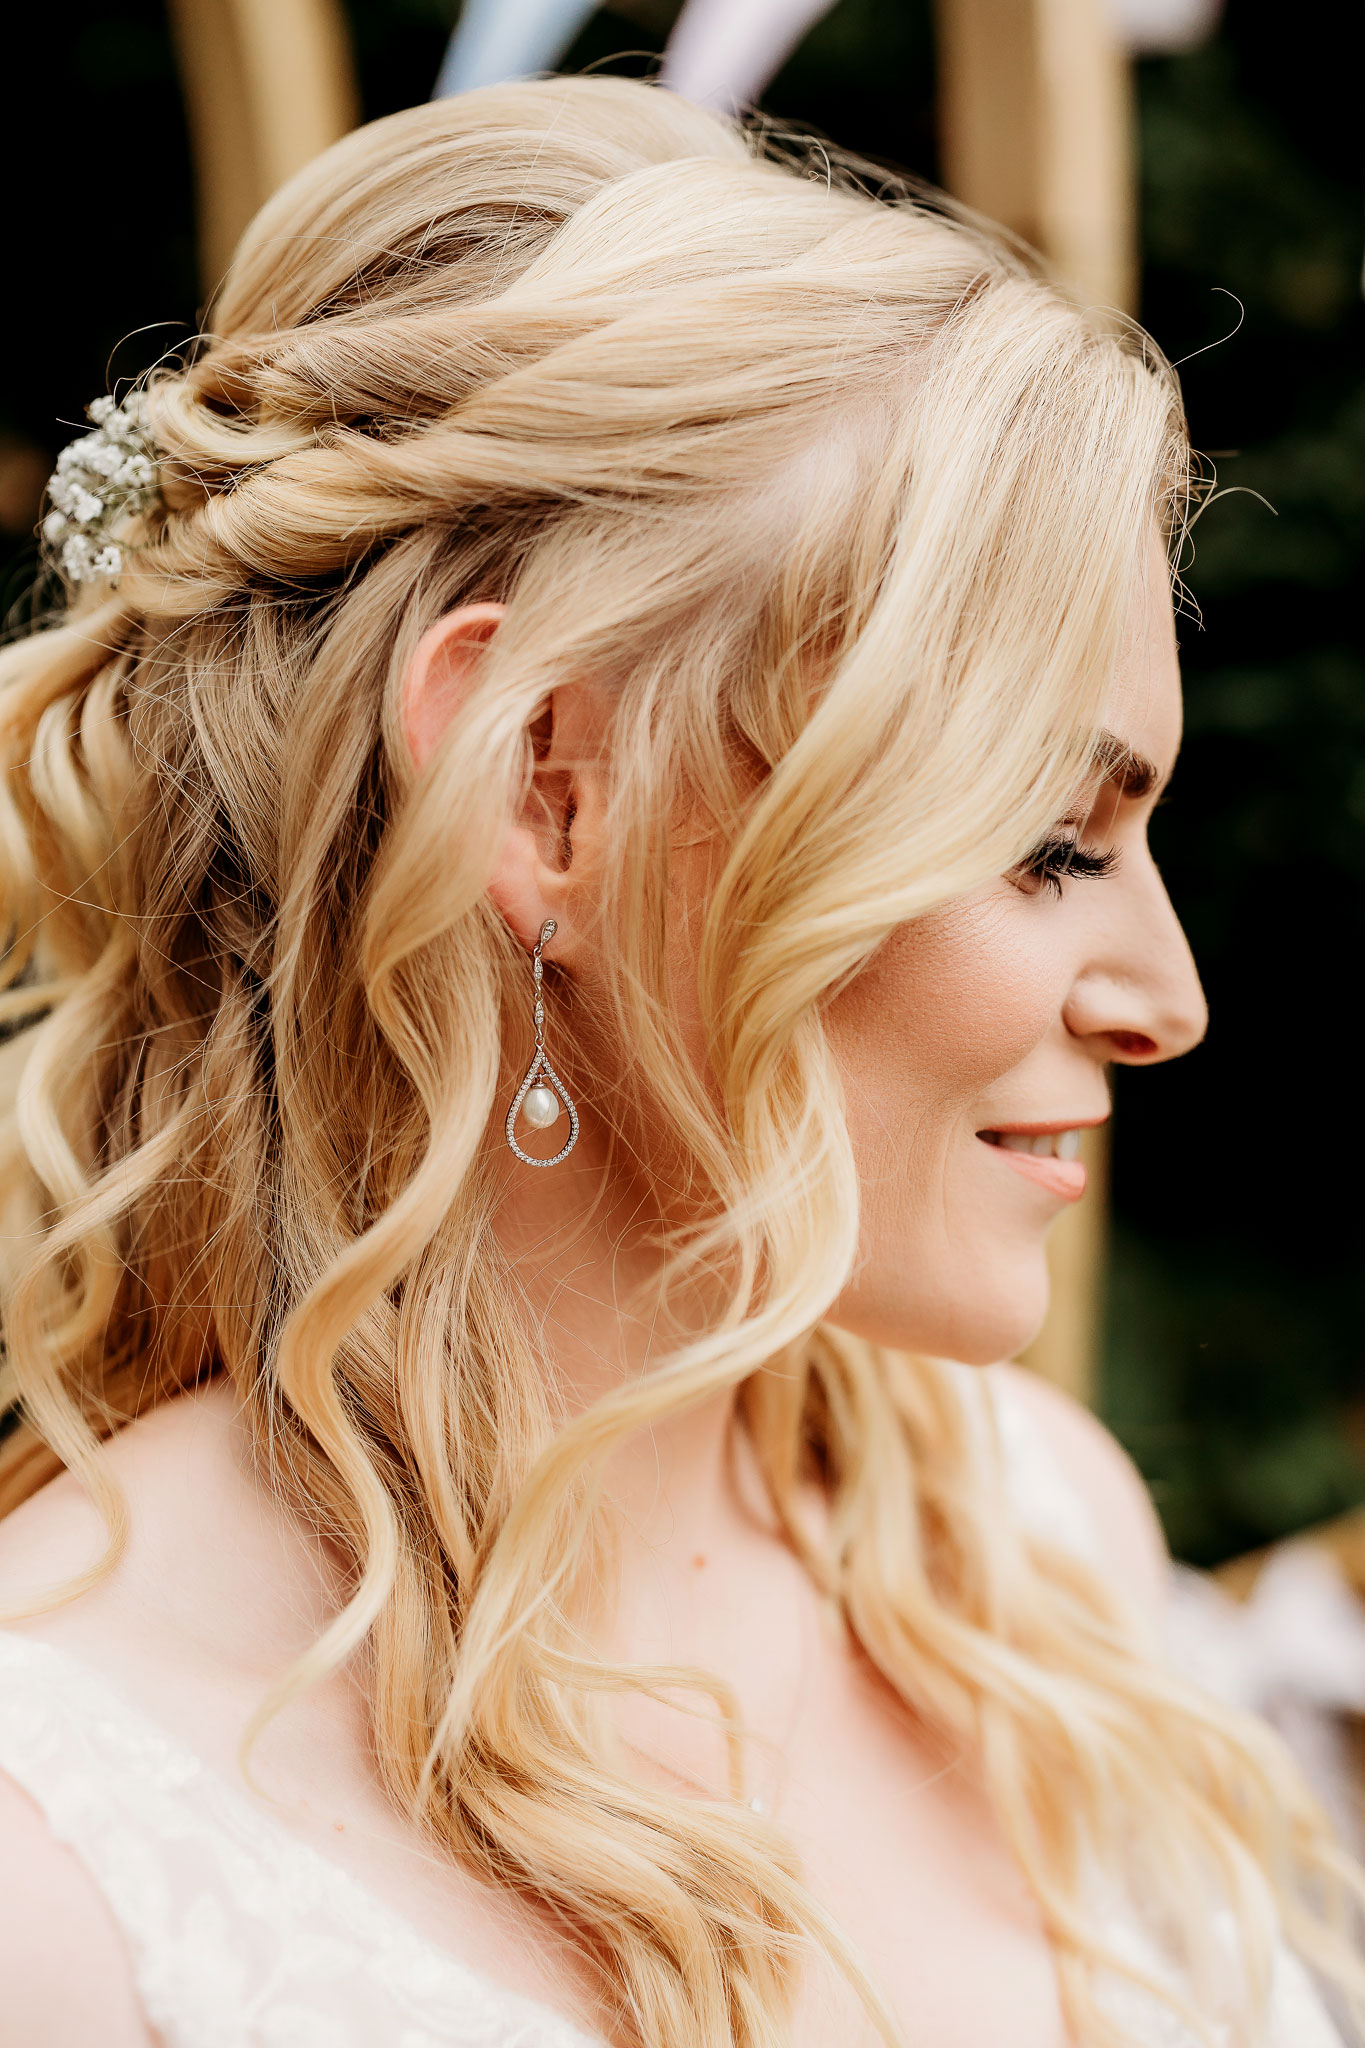 a close up of the brides earring and hair